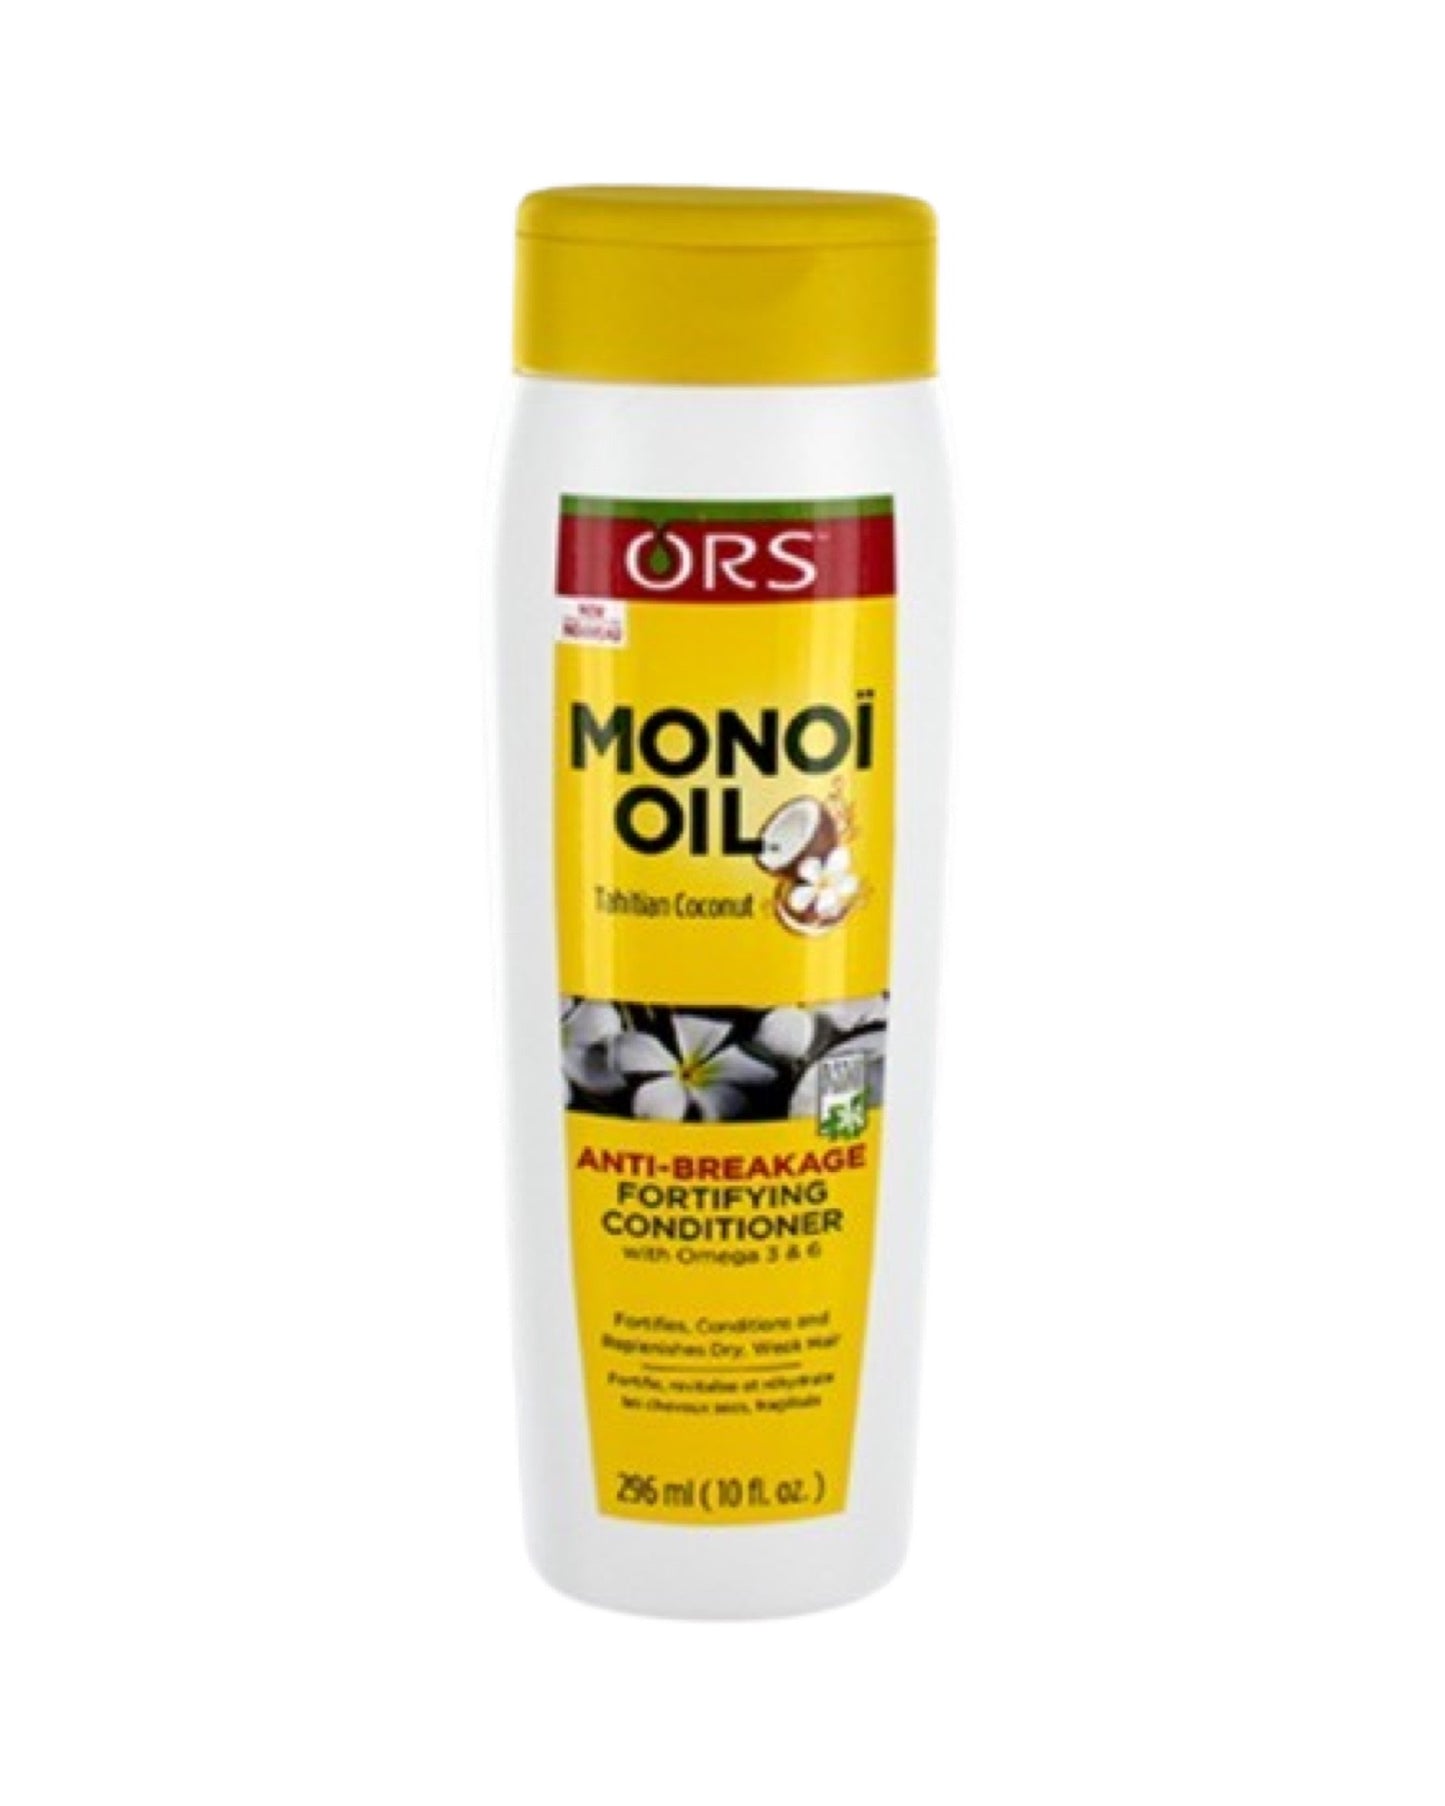 Ors Monoi Oil Anti-Breakage Fortifying Conditioner - 10 Oz